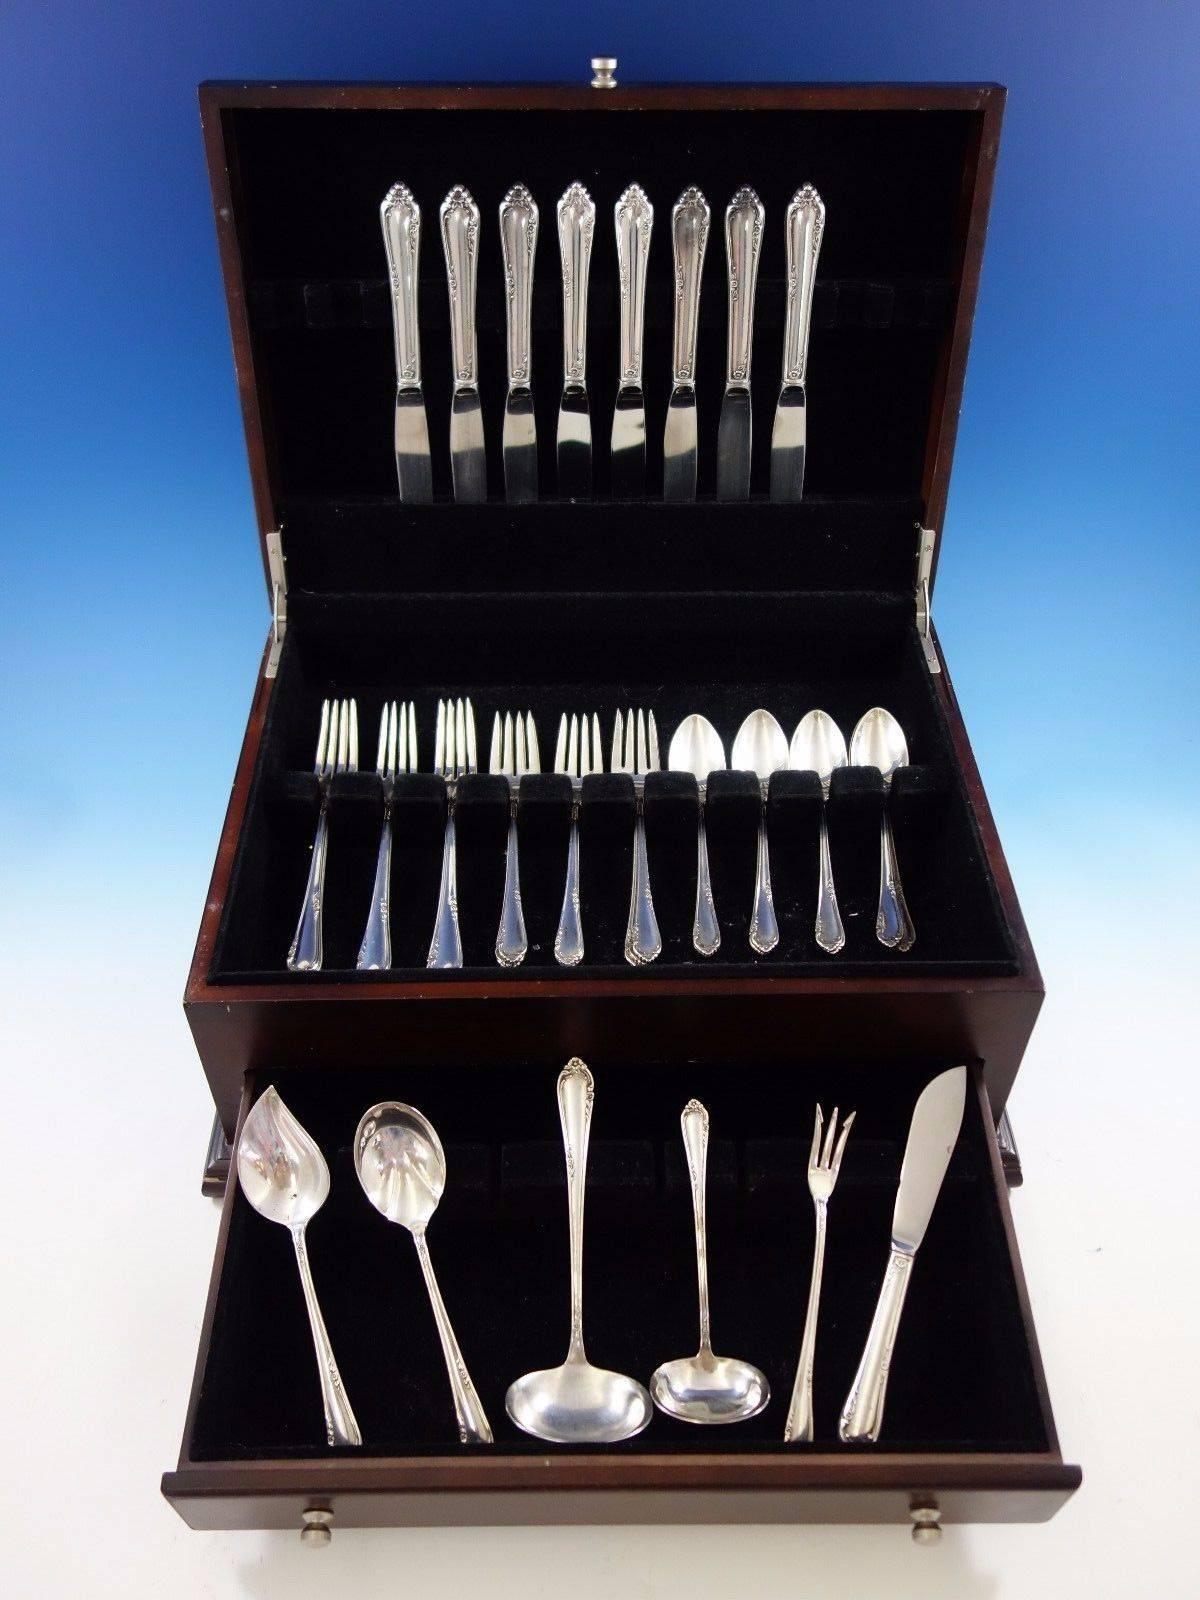 Dancing flowers by Reed & Barton sterling silver flatware set - 38 pieces. This set includes: 

Eight knives, 8 7/8